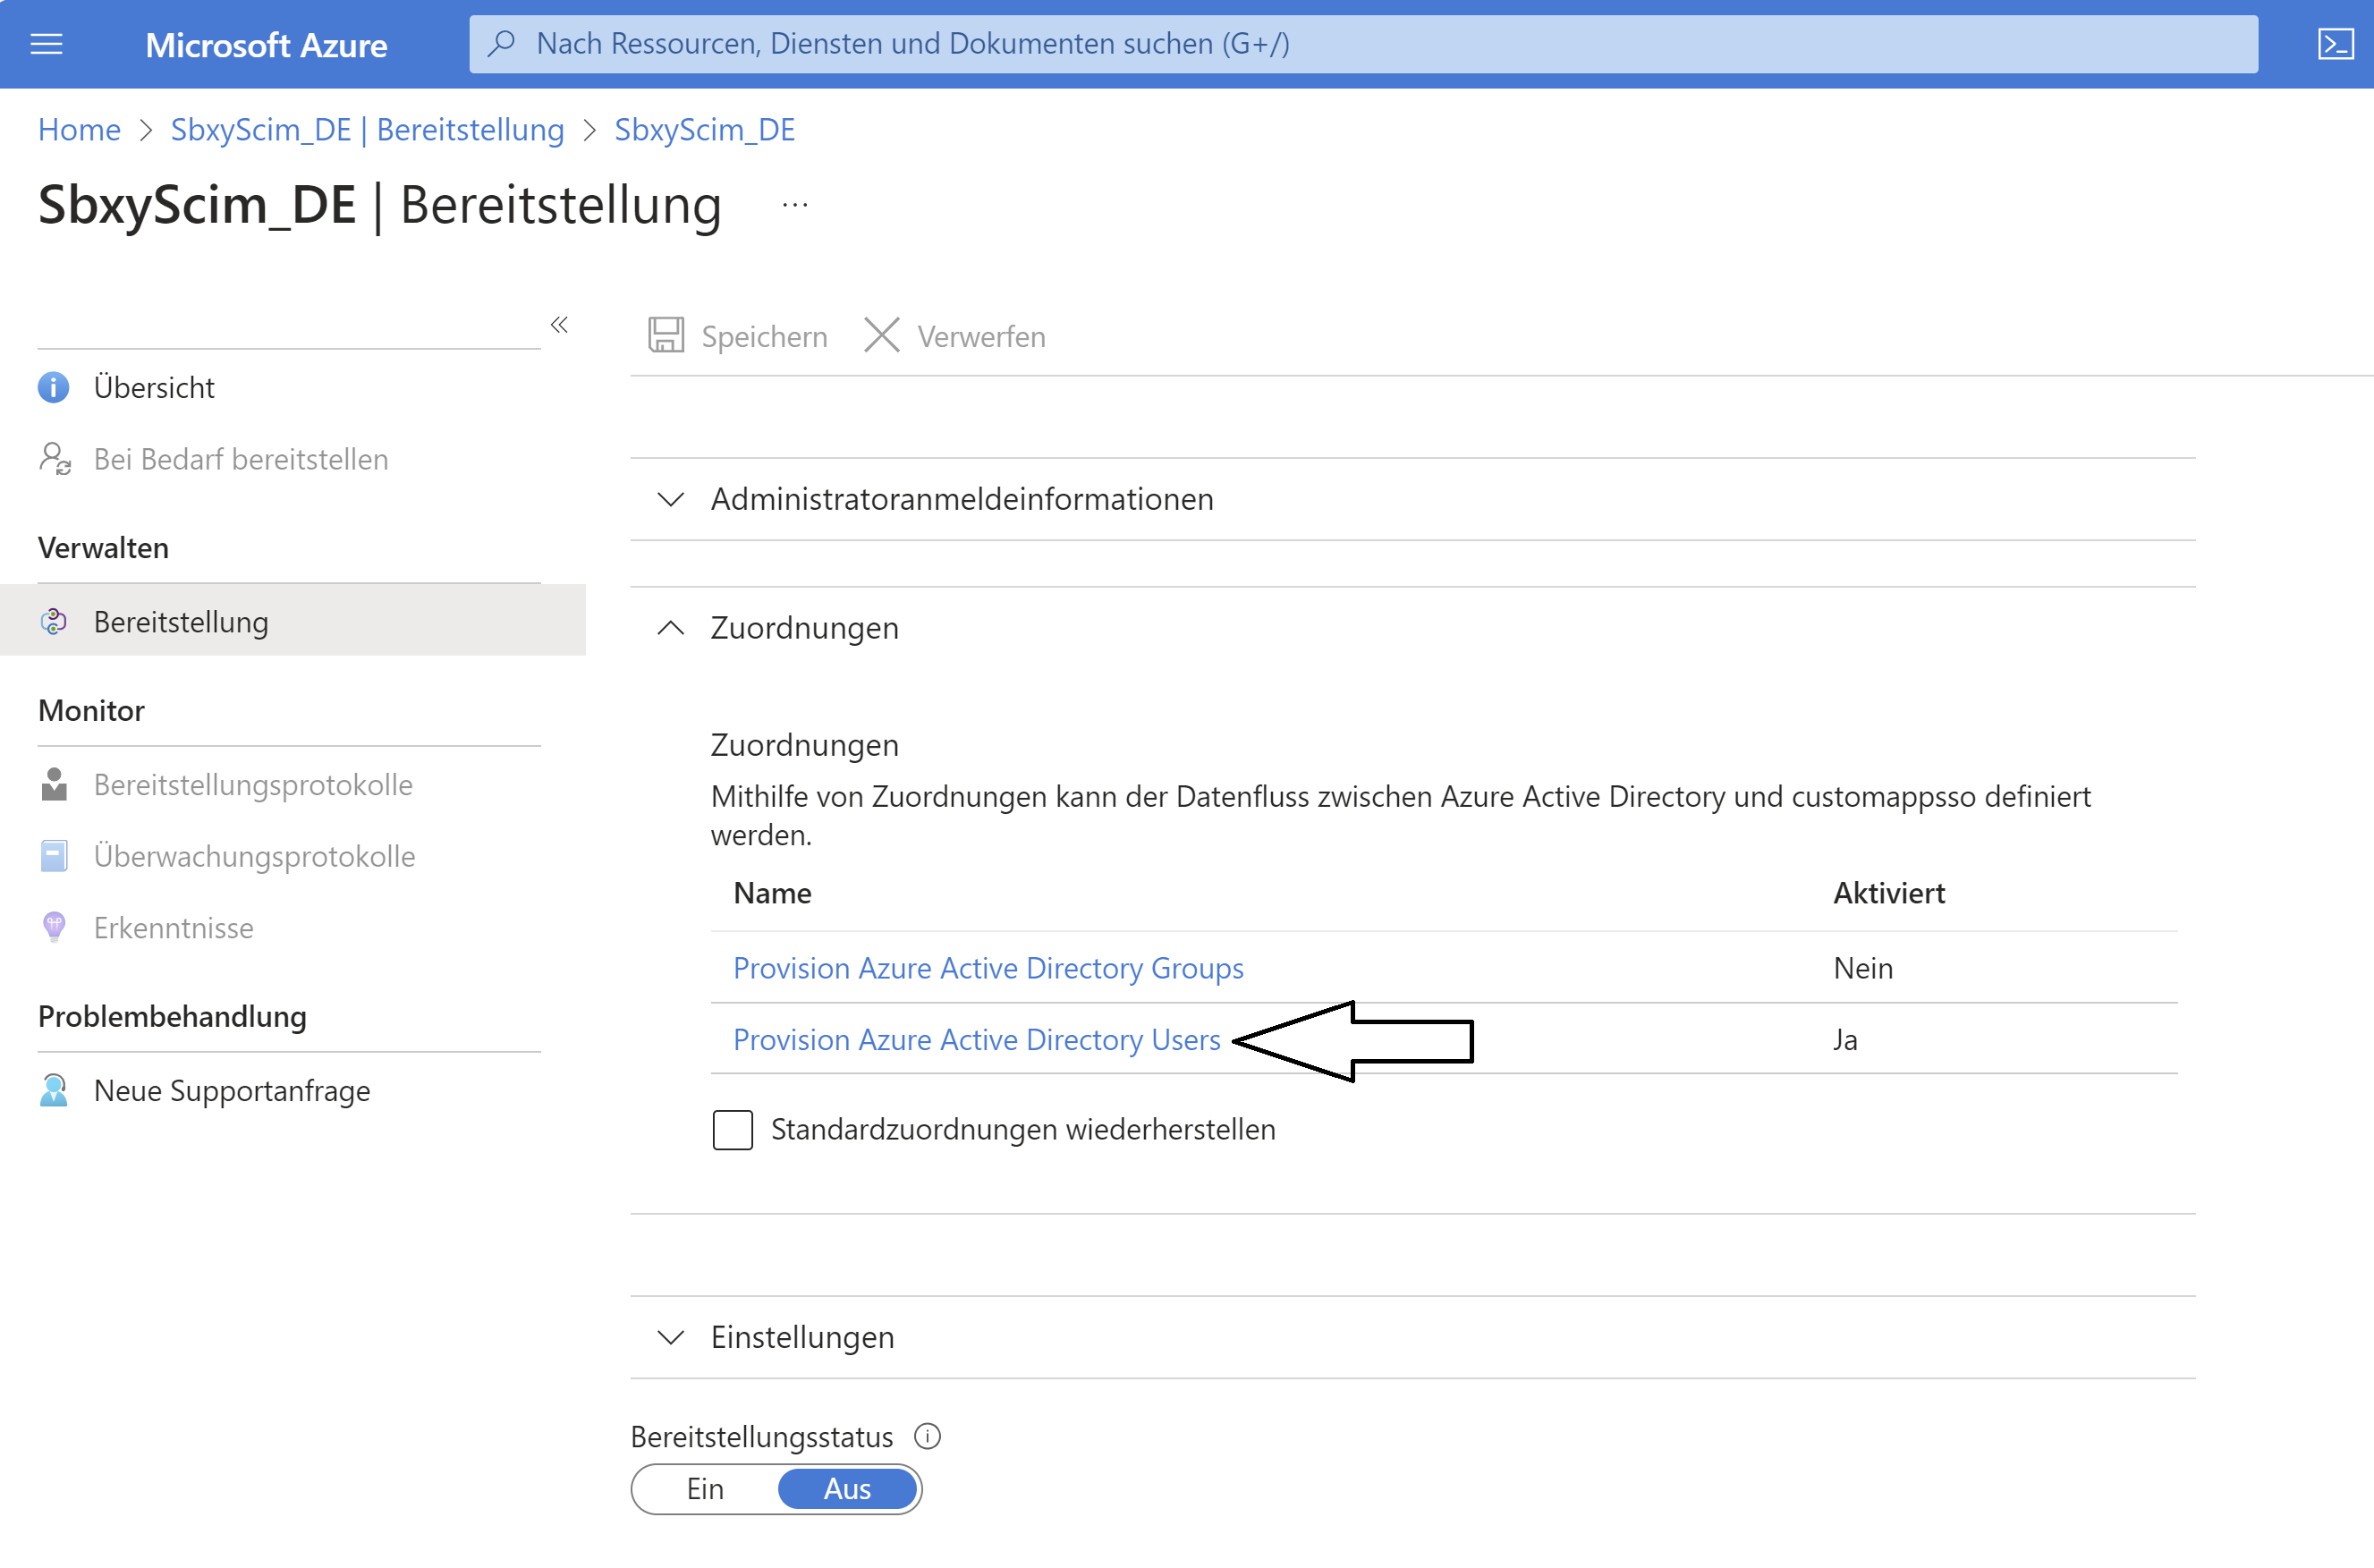 Provision Azure Active Directory Users